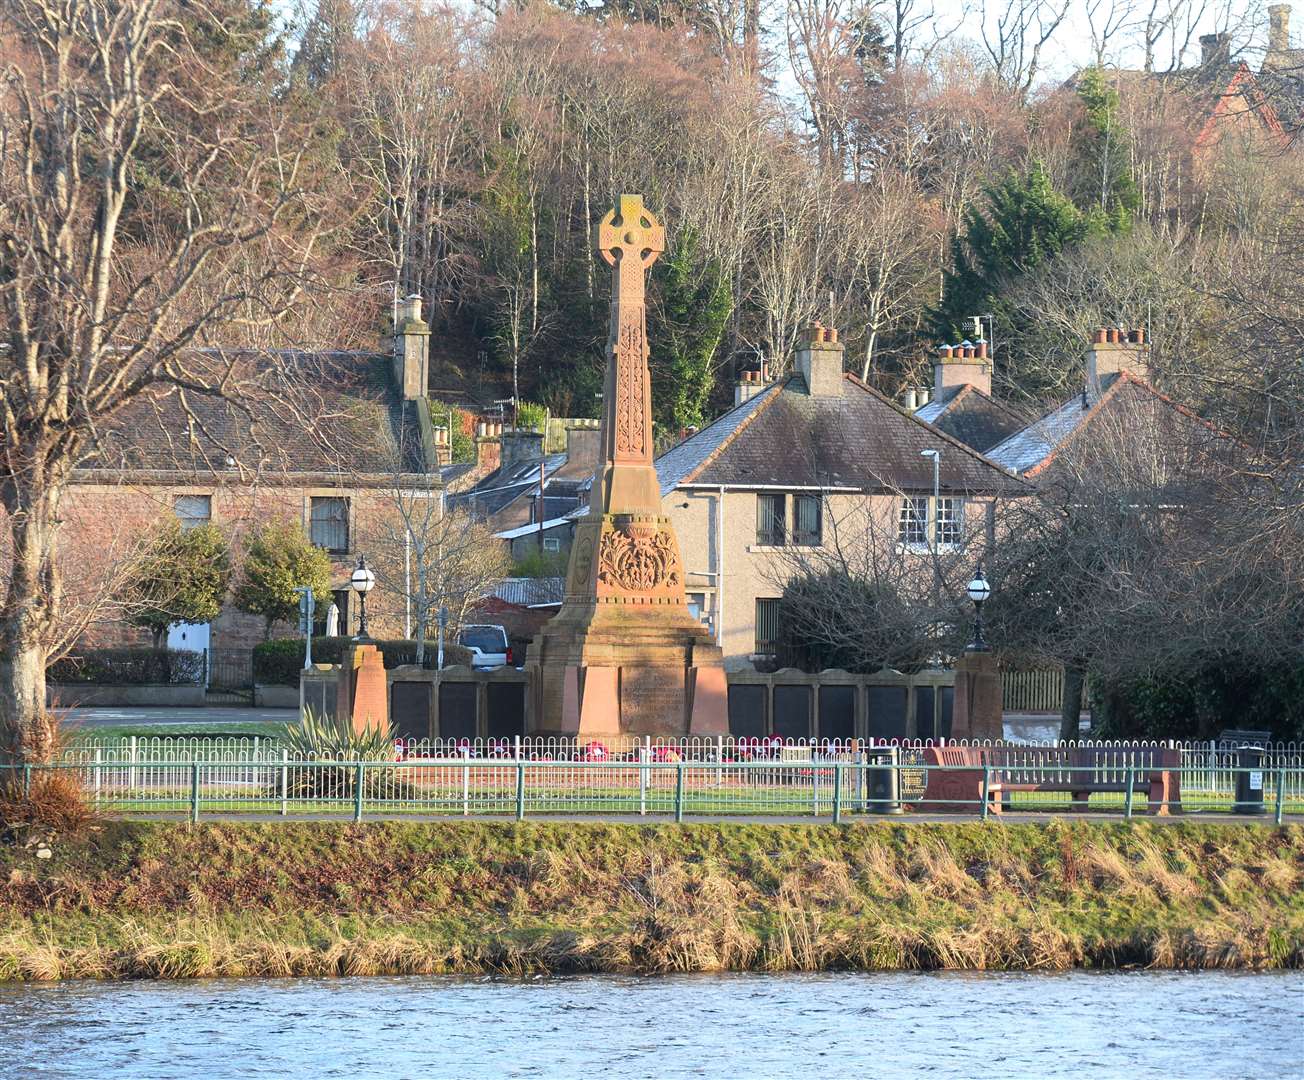 The war memorial in Cavell Gardens, Inverness.